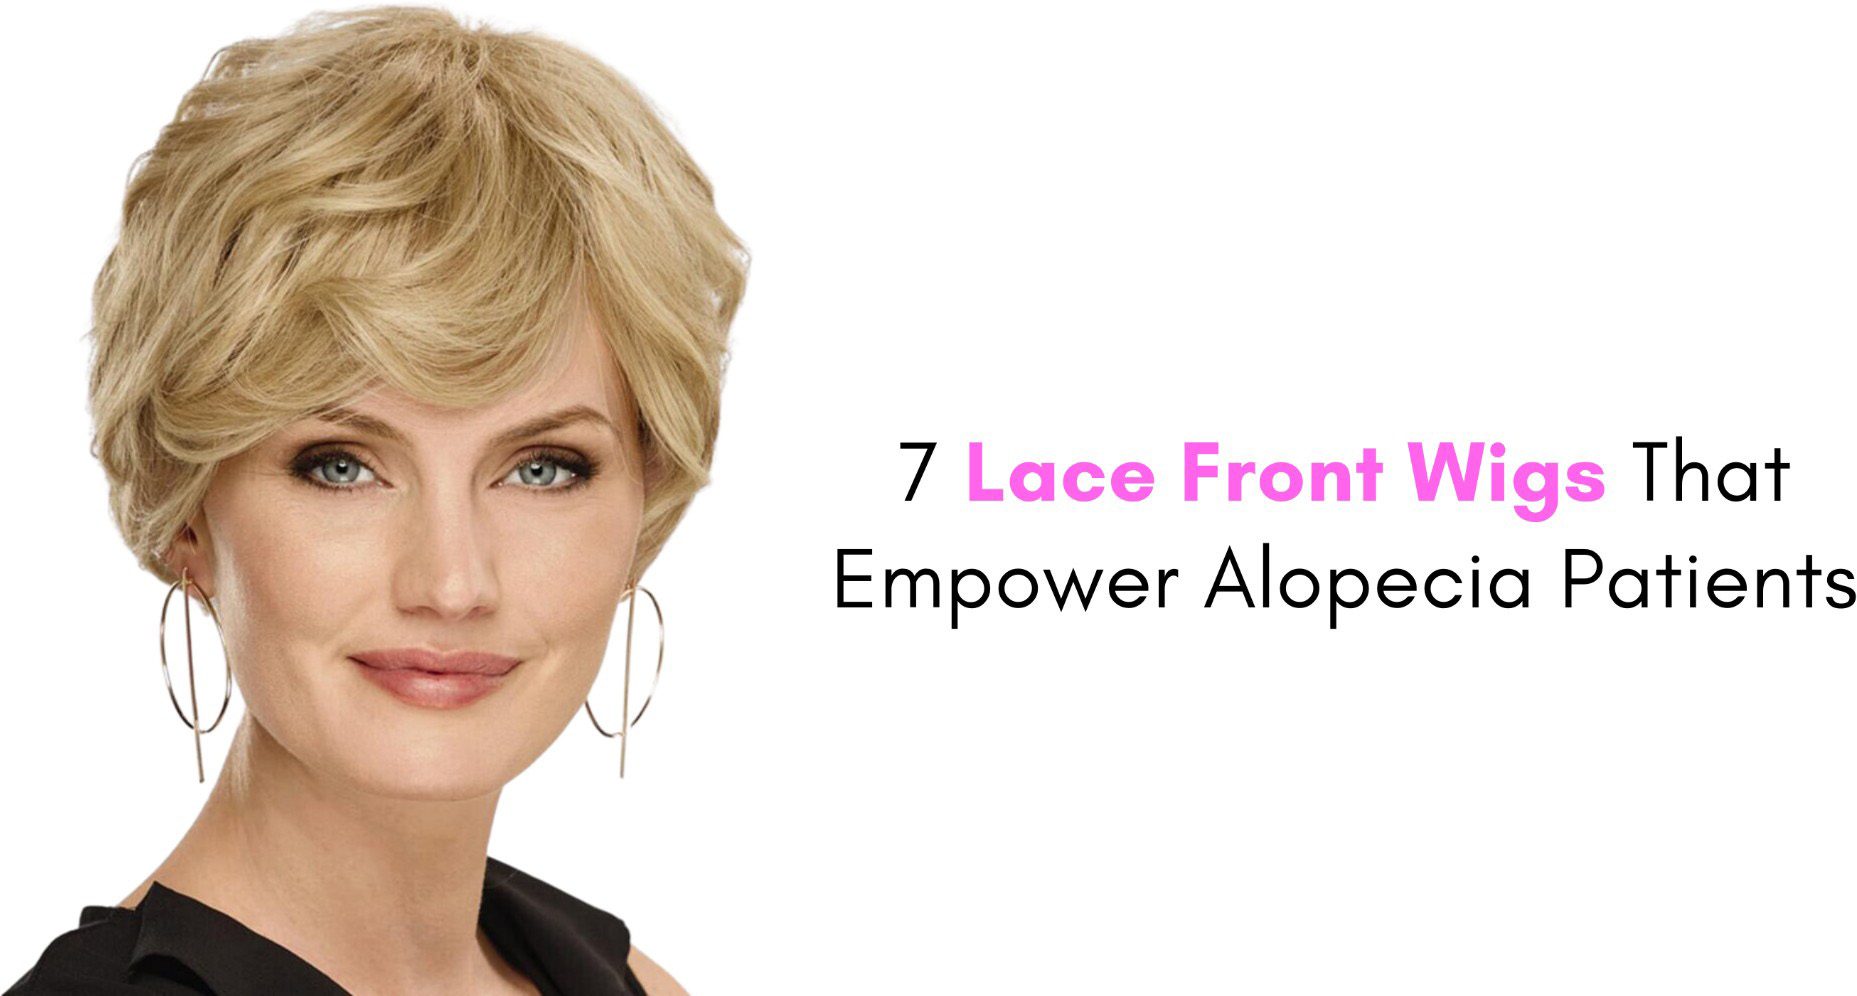 7 lace front wigs that empower alopecia patients